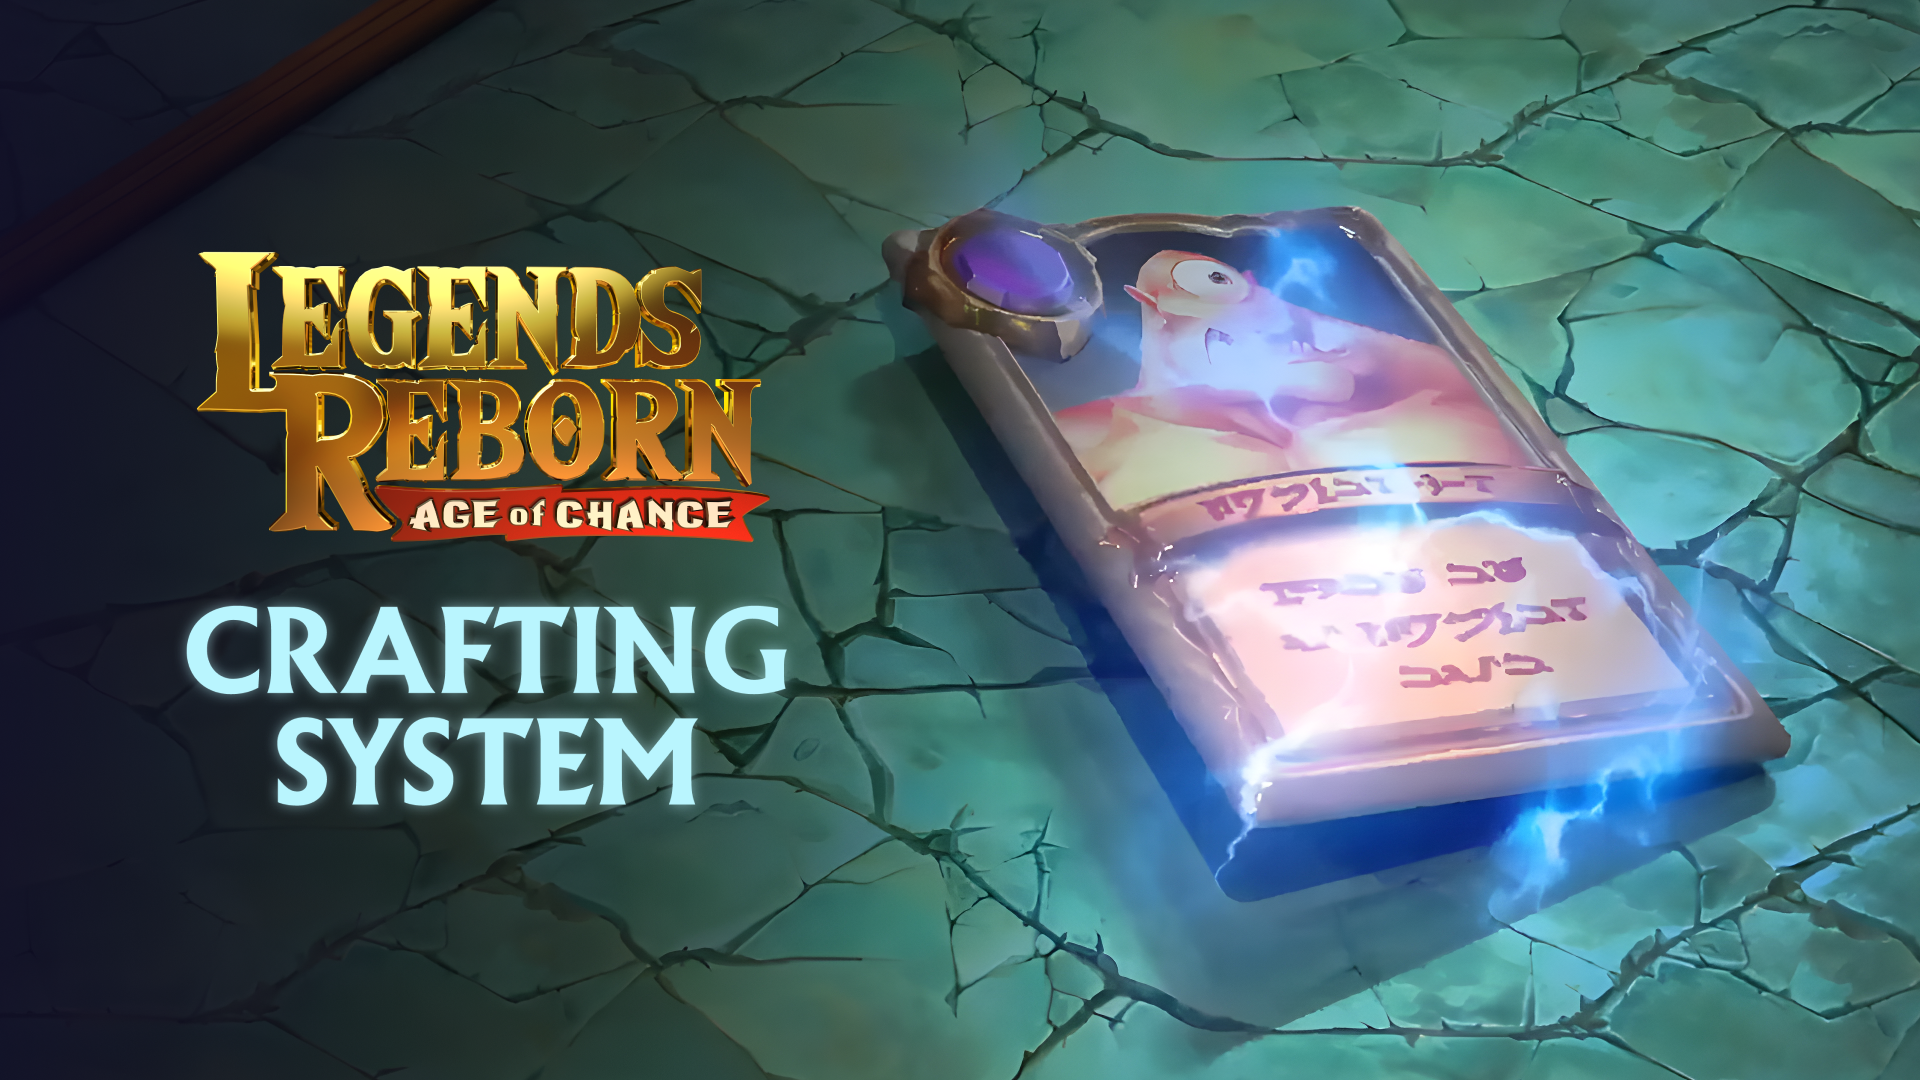 Legends Reborn's new crafting system is live, allowing players to collect and trade resources for the NFT cards they're after!